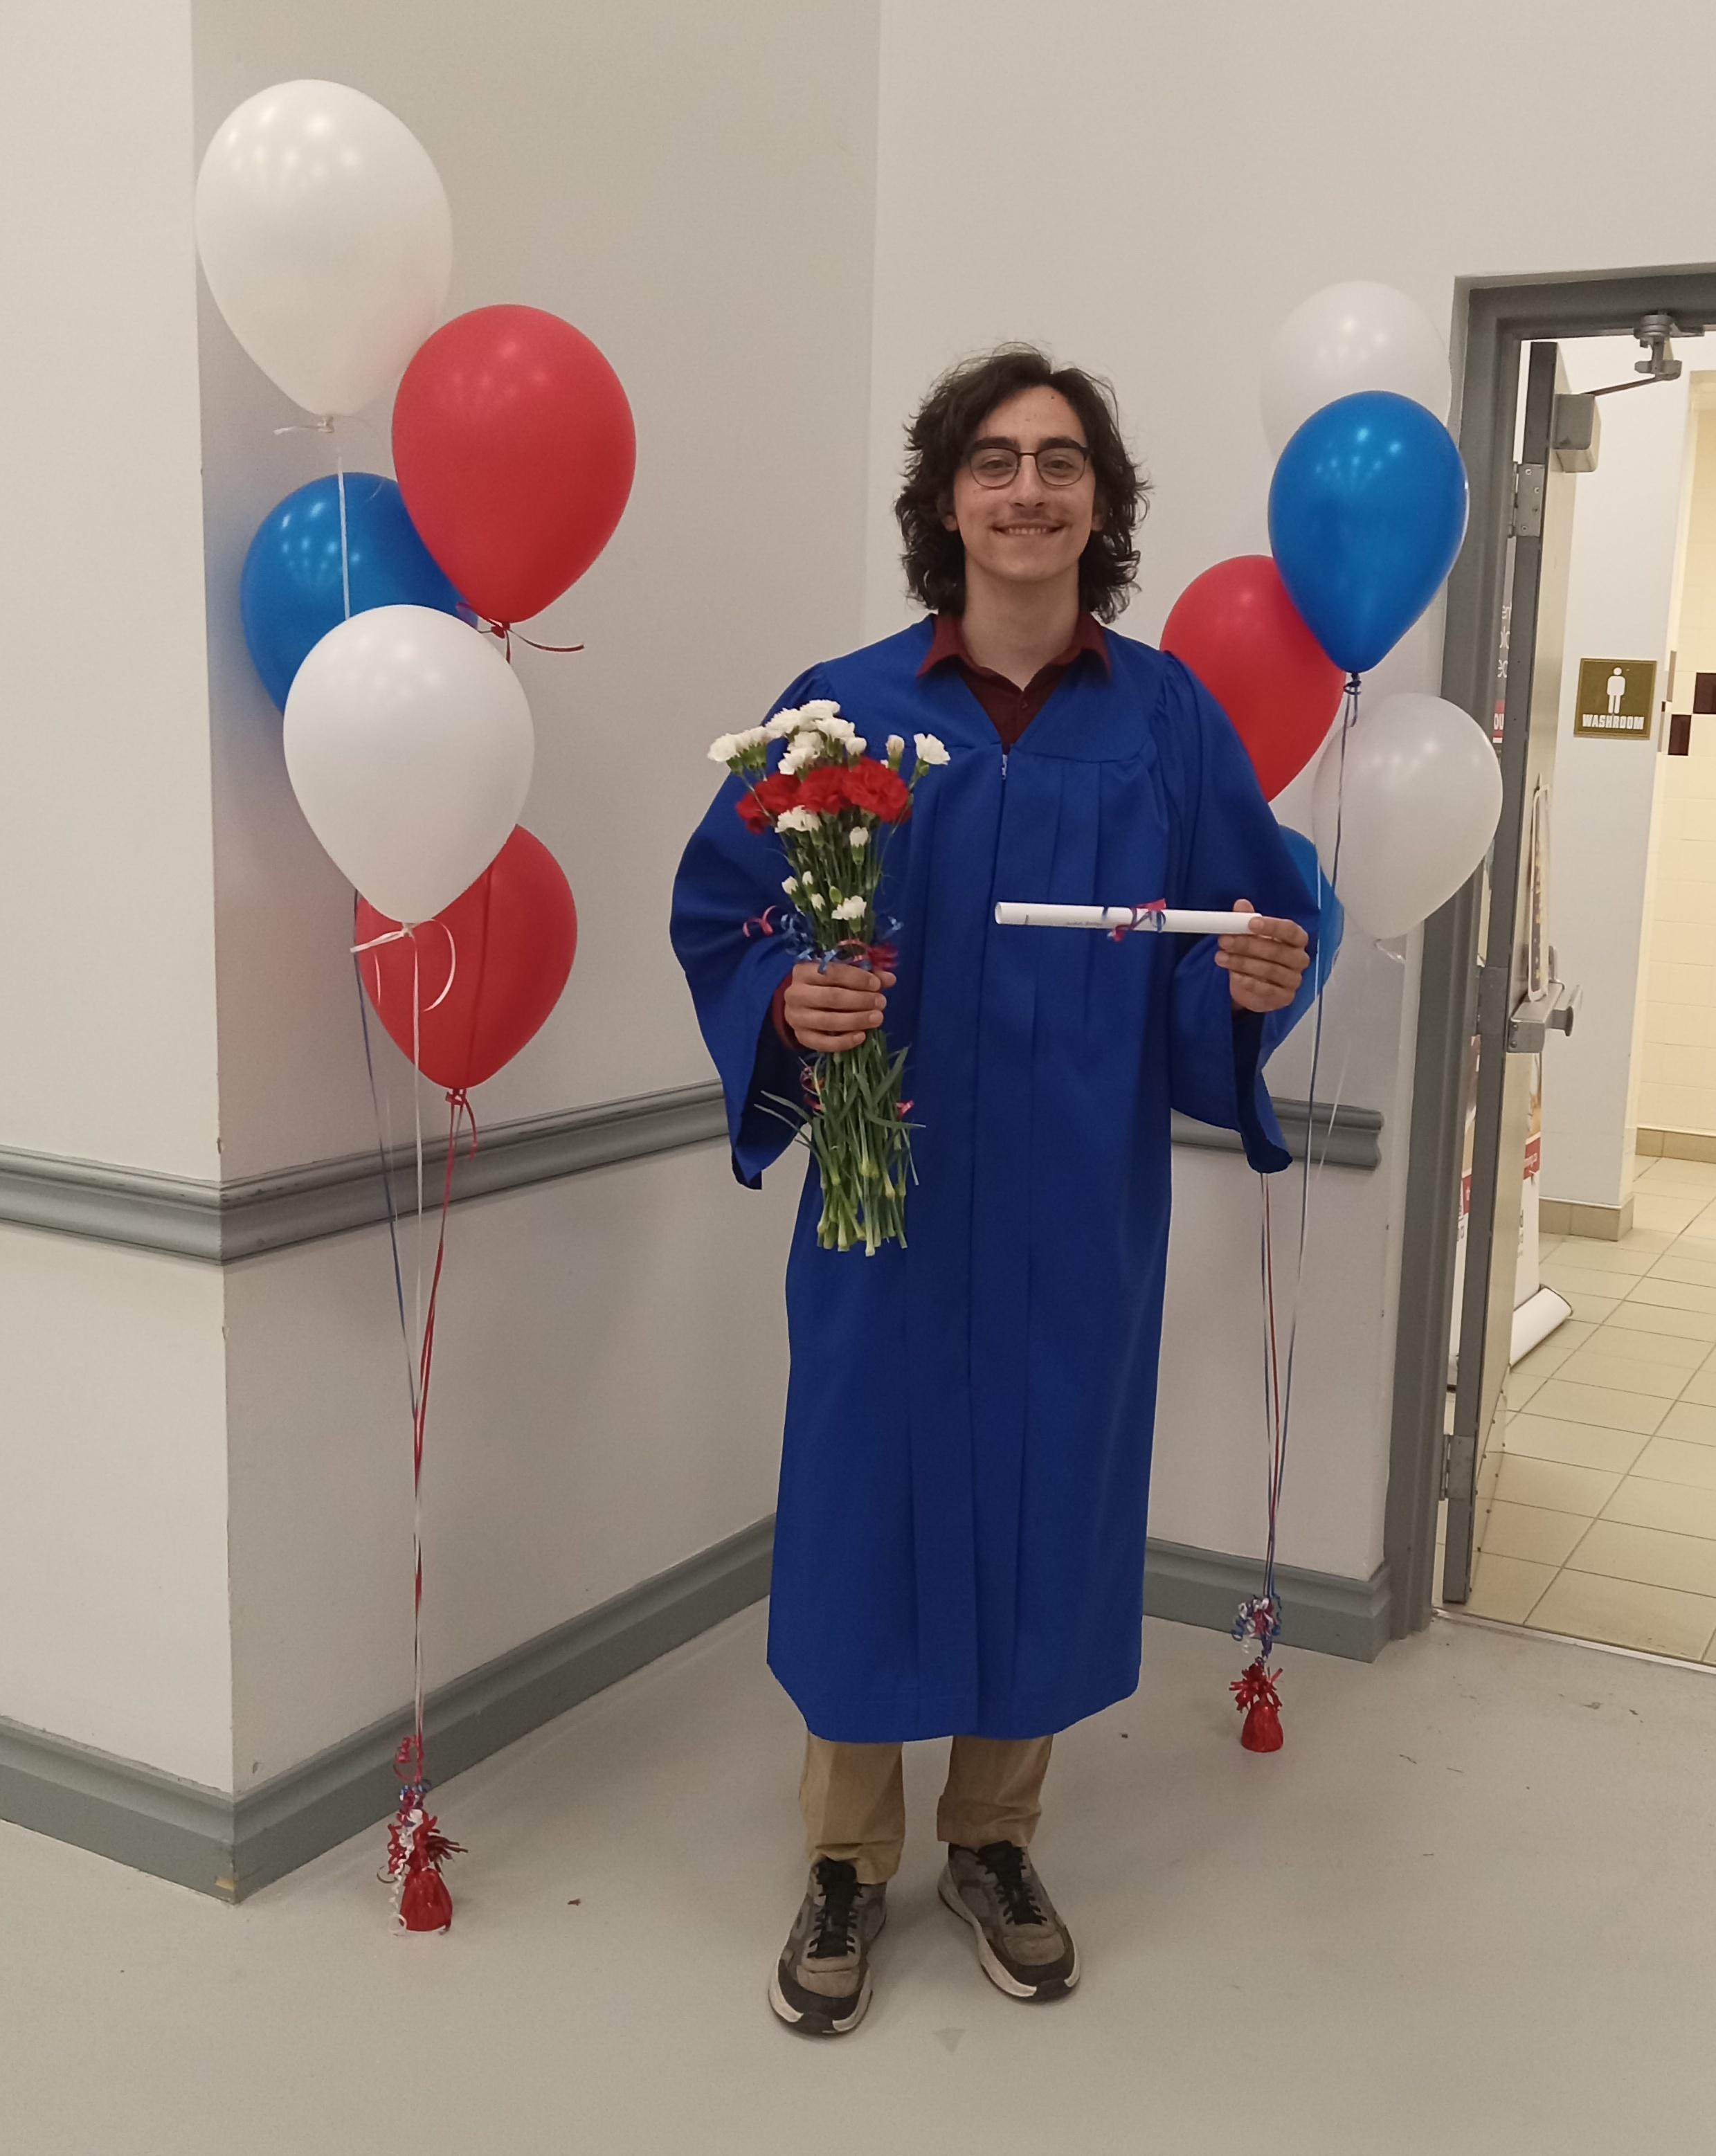 Judah poses in front of red, blue, and white balloons